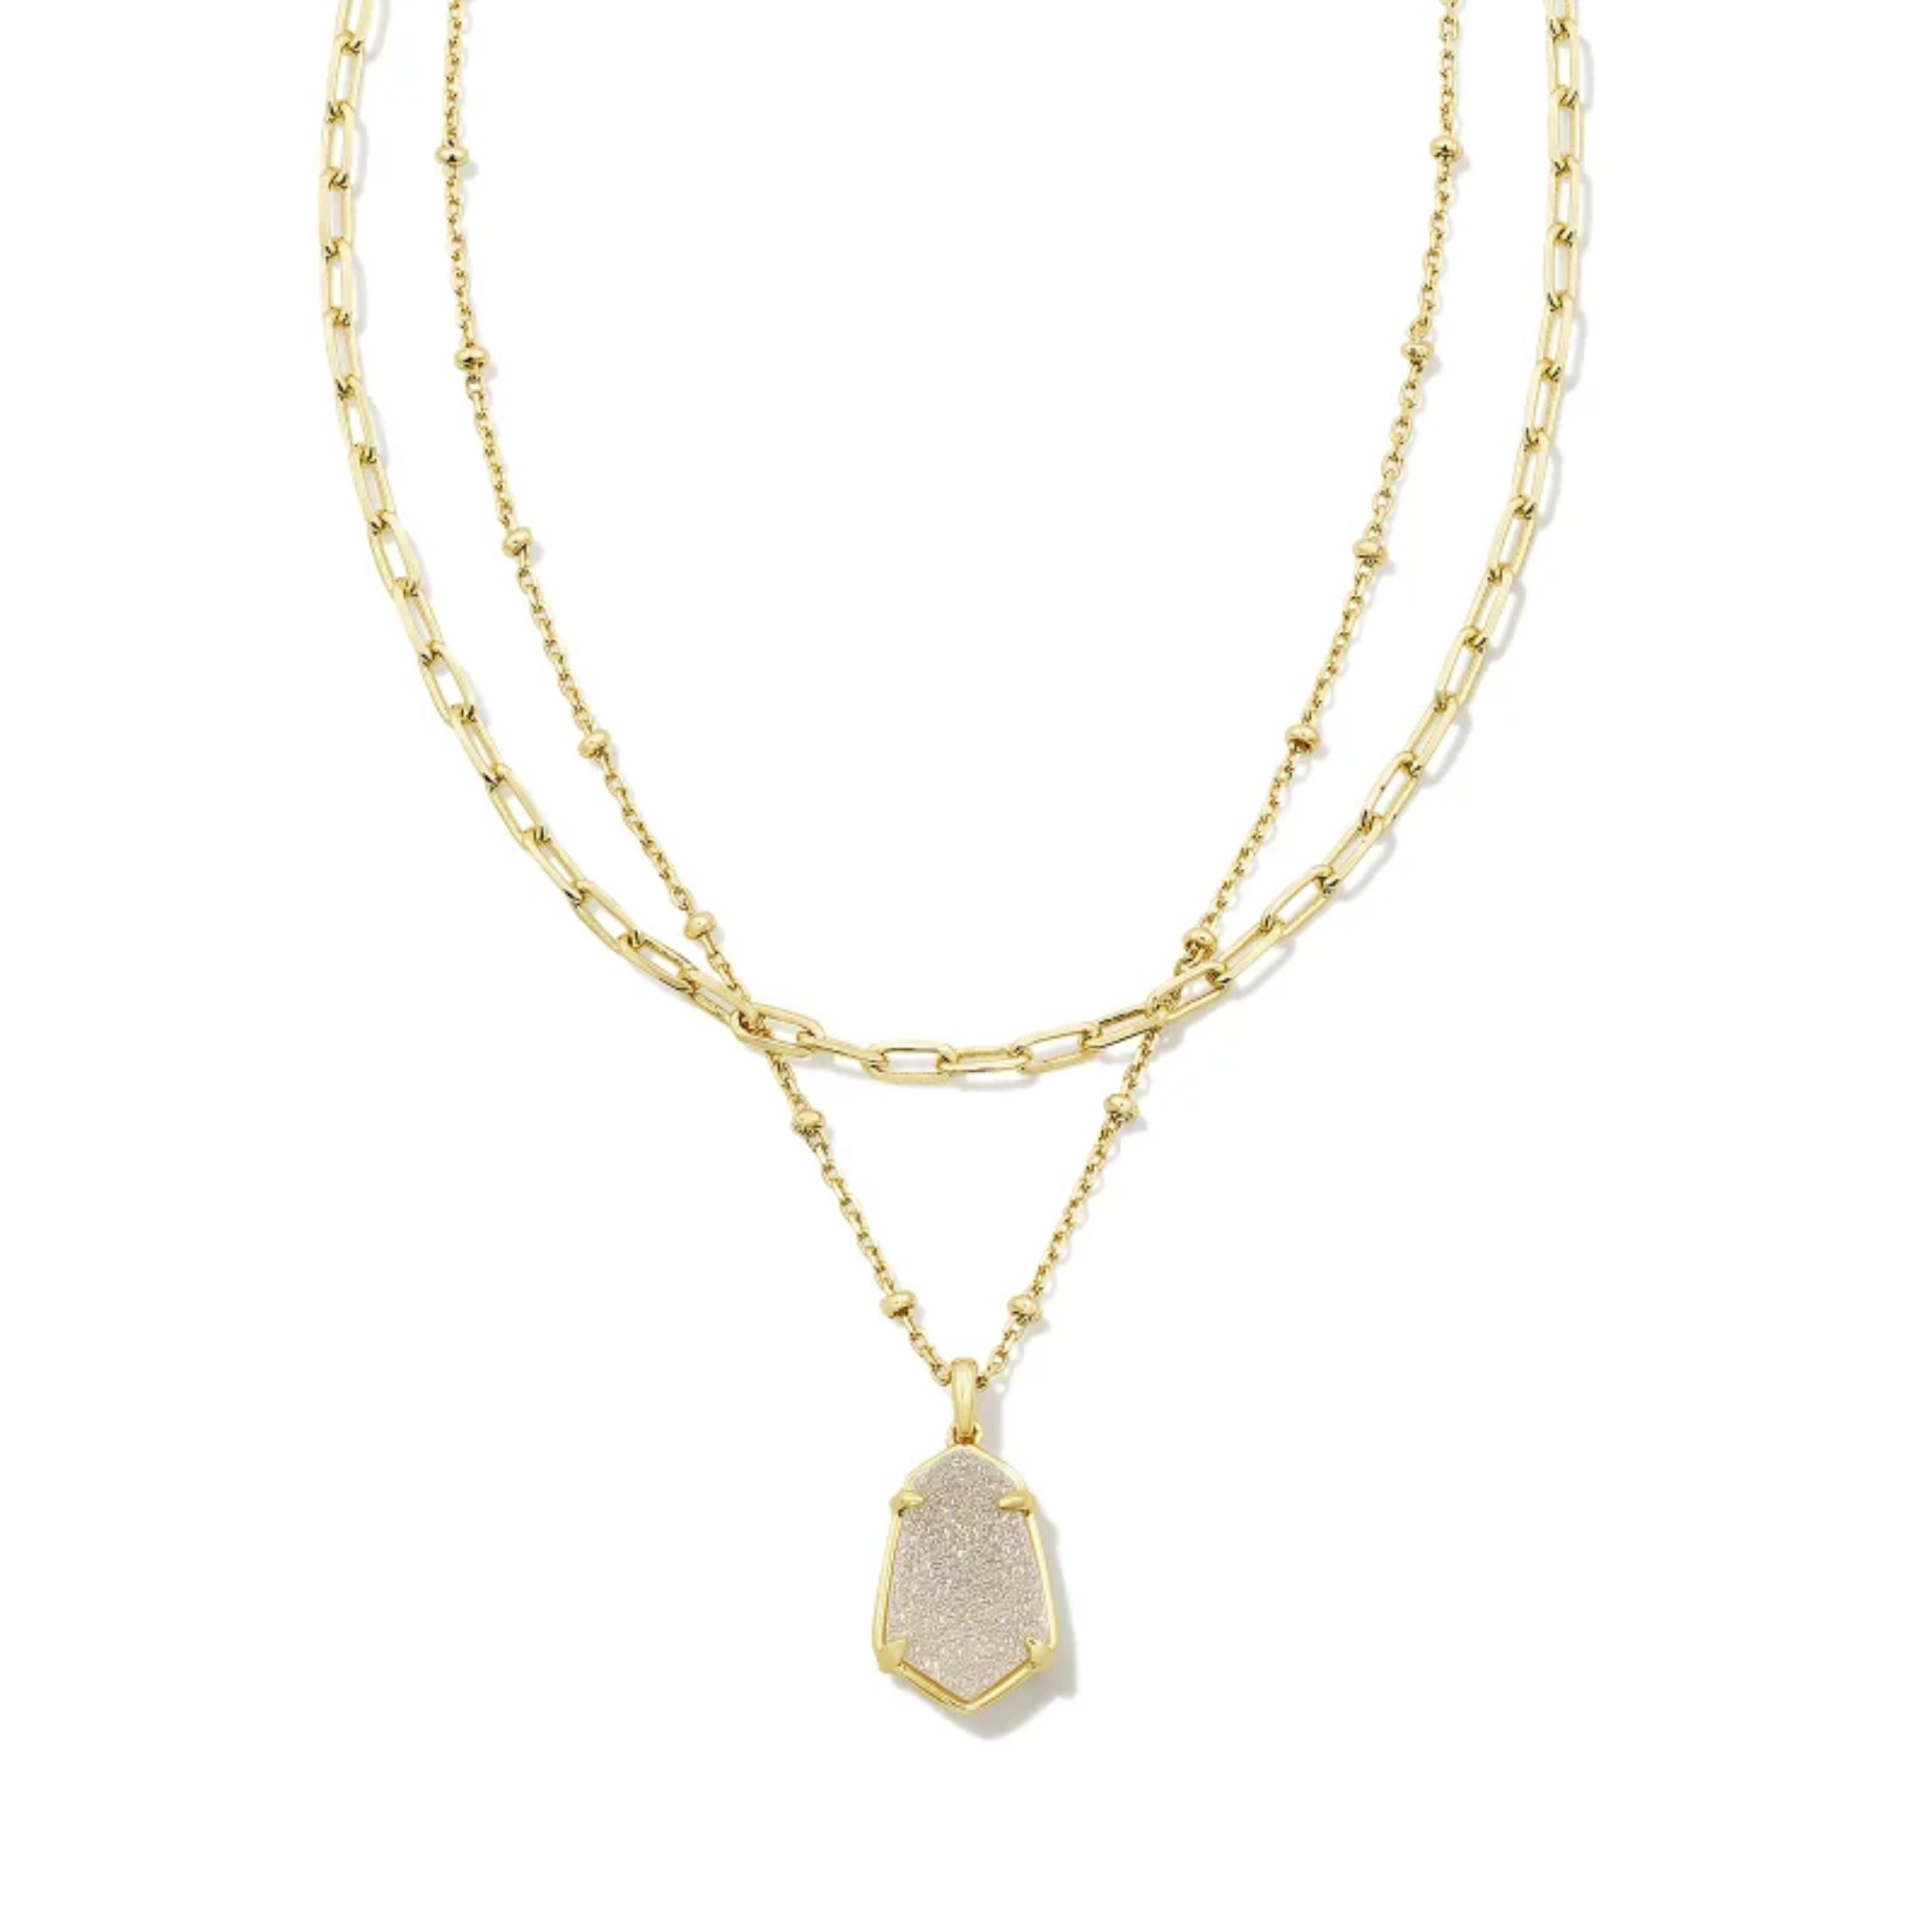 This Alexandria Gold Multi Strand Necklace in Iridescent Drusy by Kendra Scott is pictured on a white background.